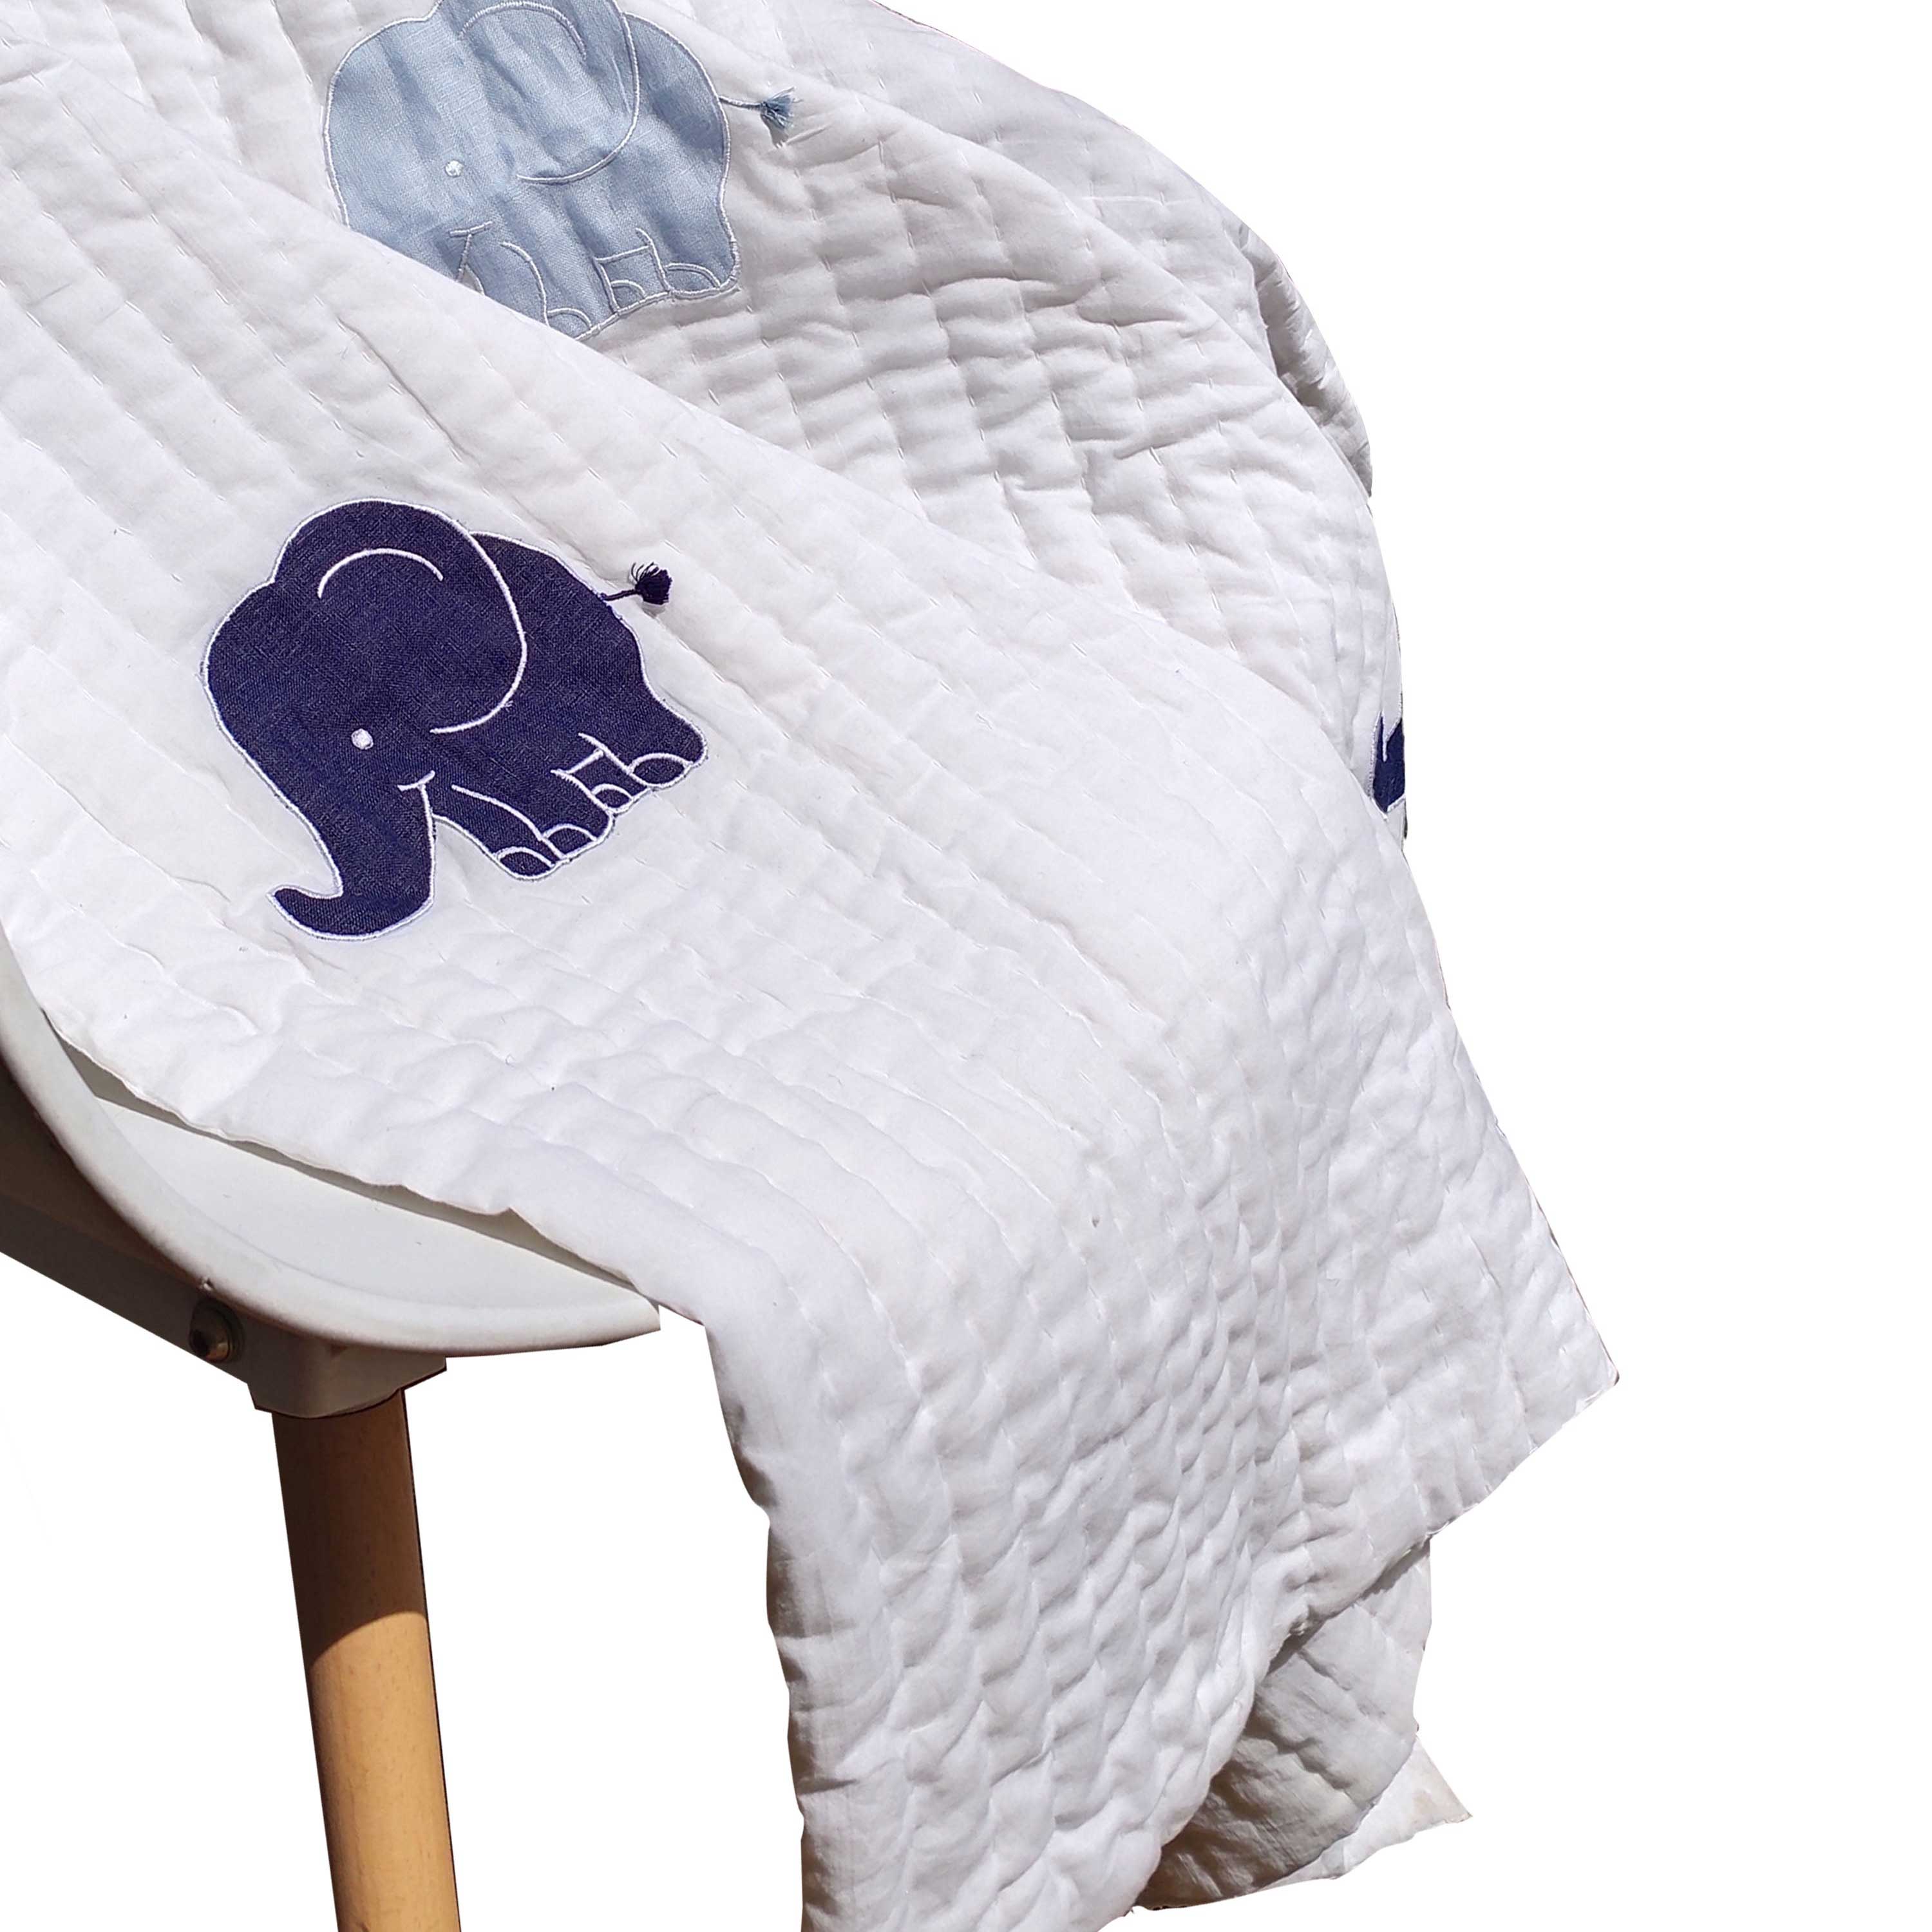 Elephant Quilt For Kids and Toddlers